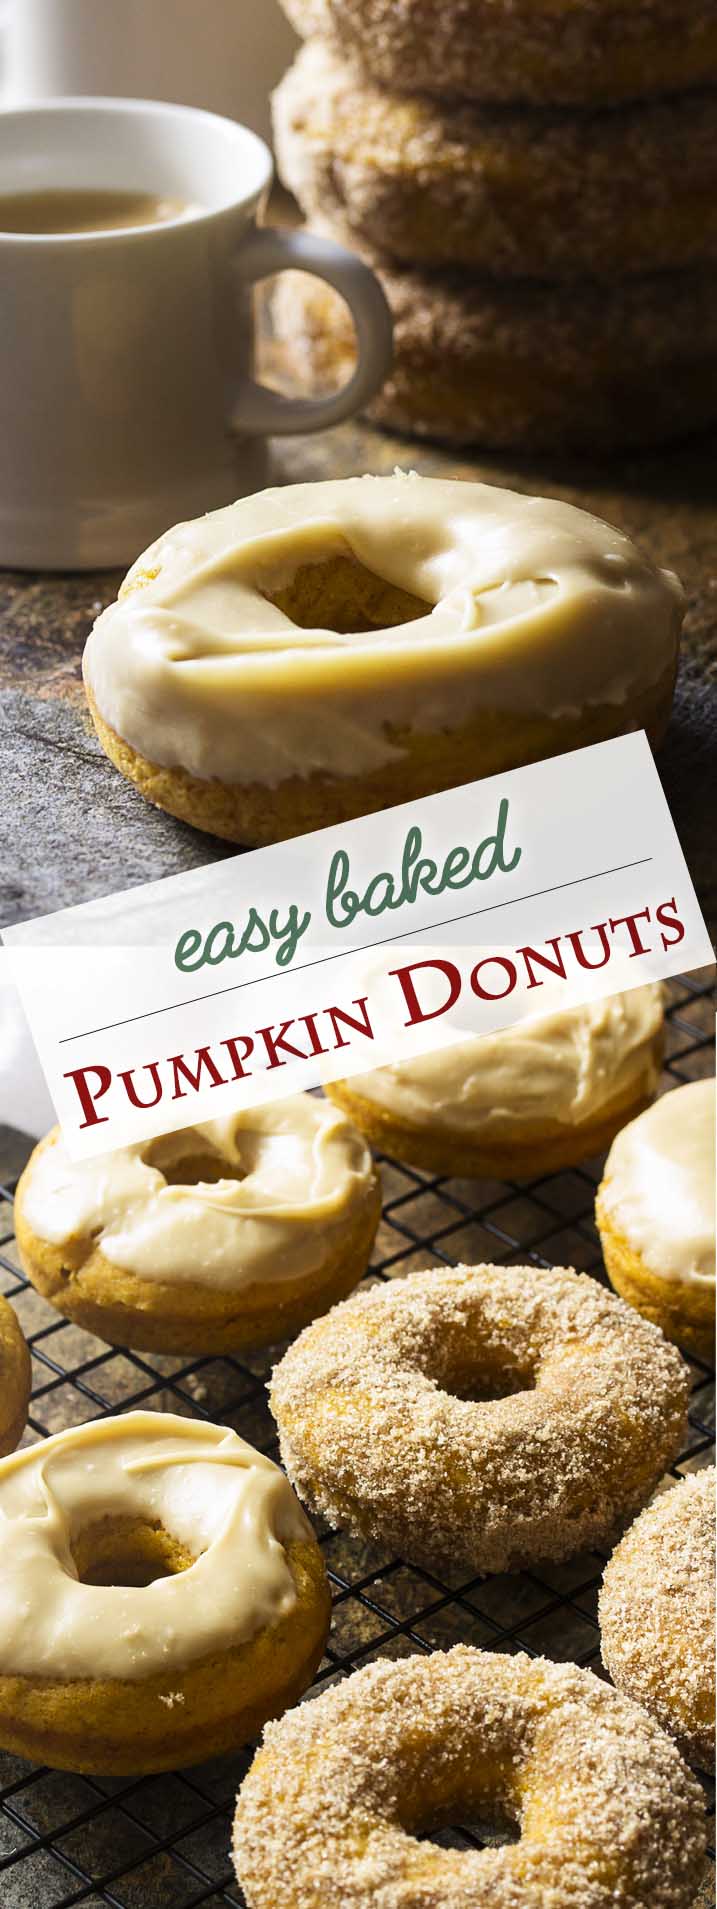 These easy and tasty baked pumpkin donuts are full of pumpkin puree and warming spices for a great fall breakfast or dessert. Either top them with a maple butterscotch glaze or roll them in cinnamon sugar. | justalittlebitofbacon.com